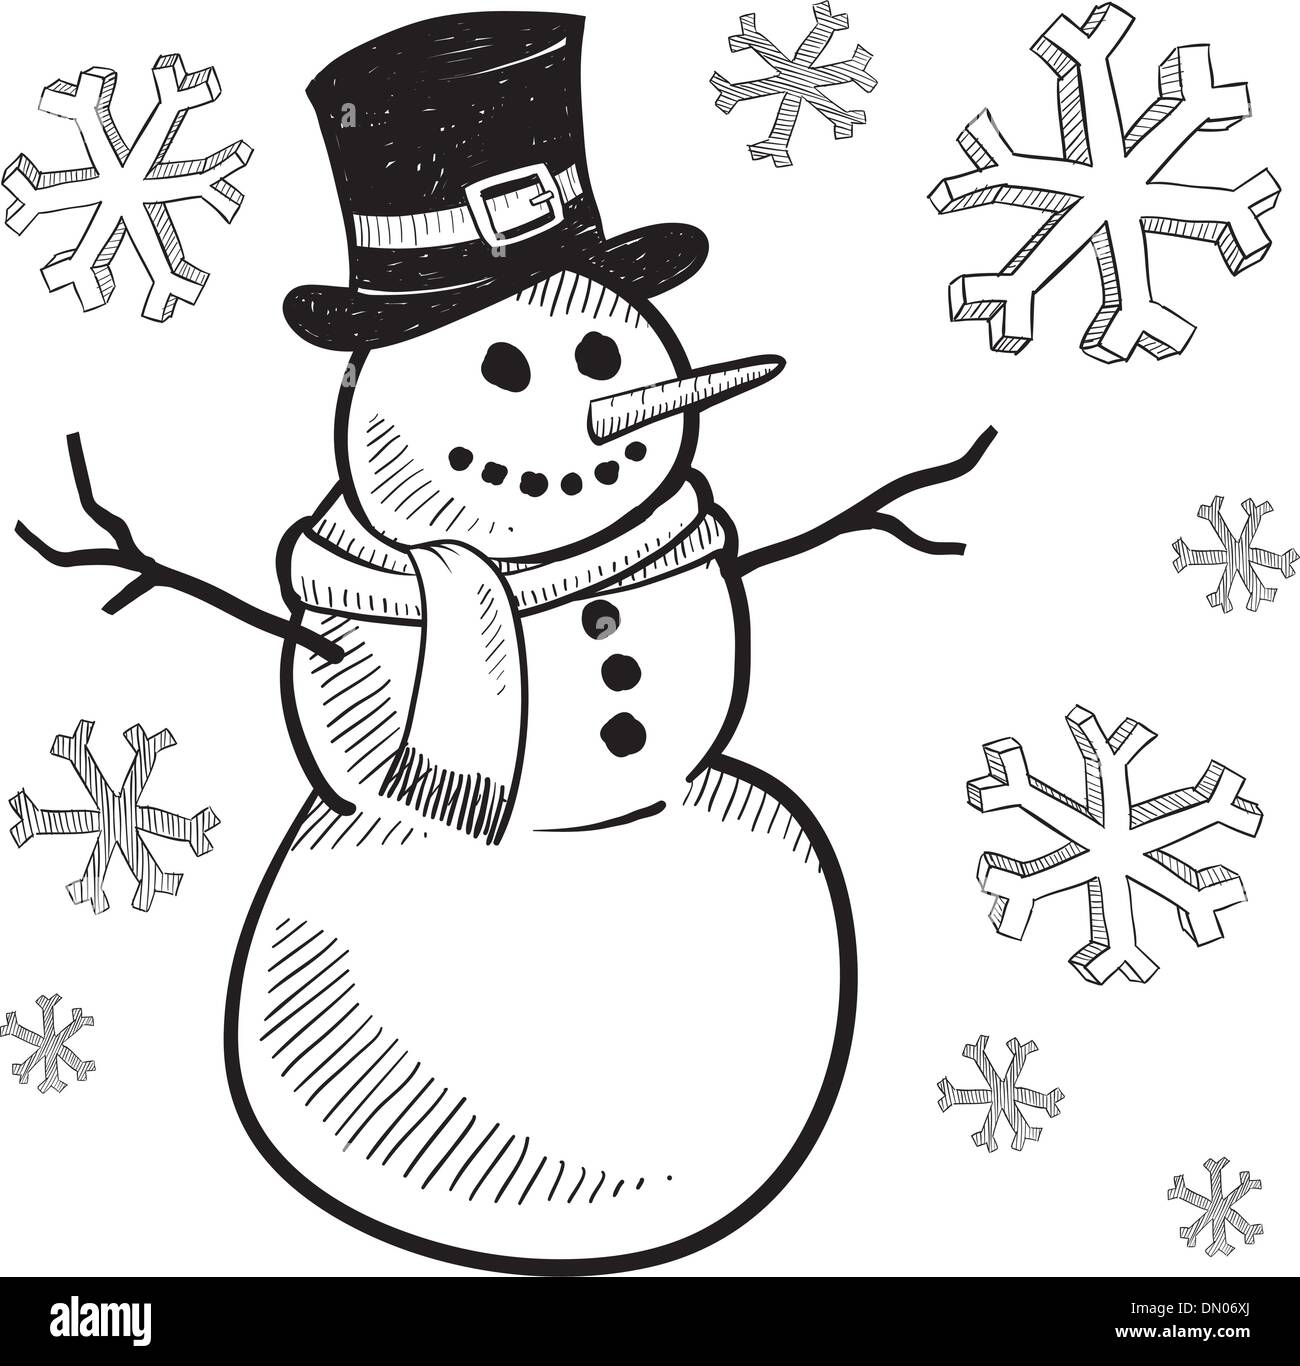 How to draw a Snowman, Christmas stuff, pictures on Vimeo